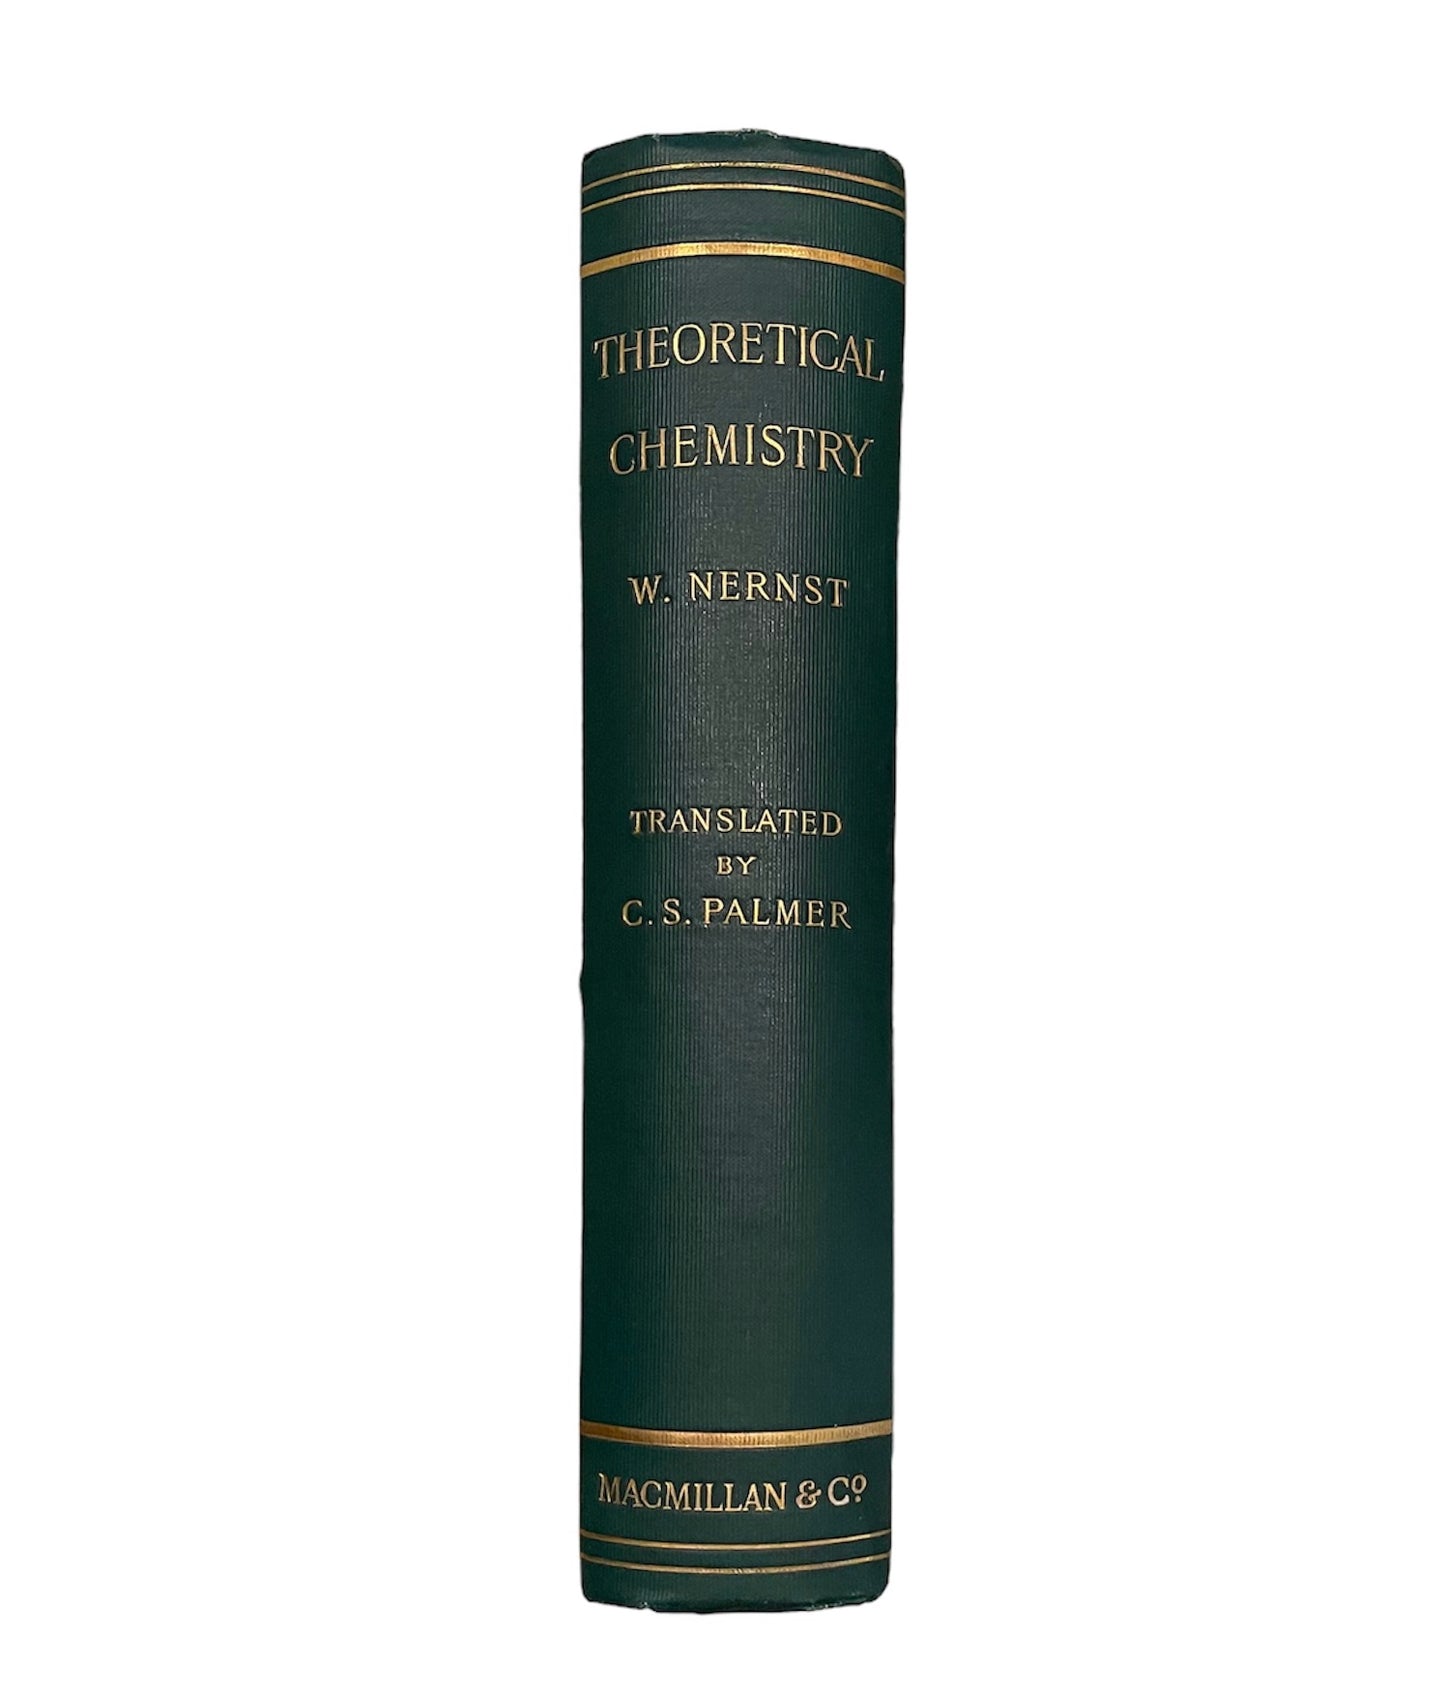 Rare Antique Theoretical Chemistry First English Edition by Walter Nernst Published in 1895 by Macmillan & Co.